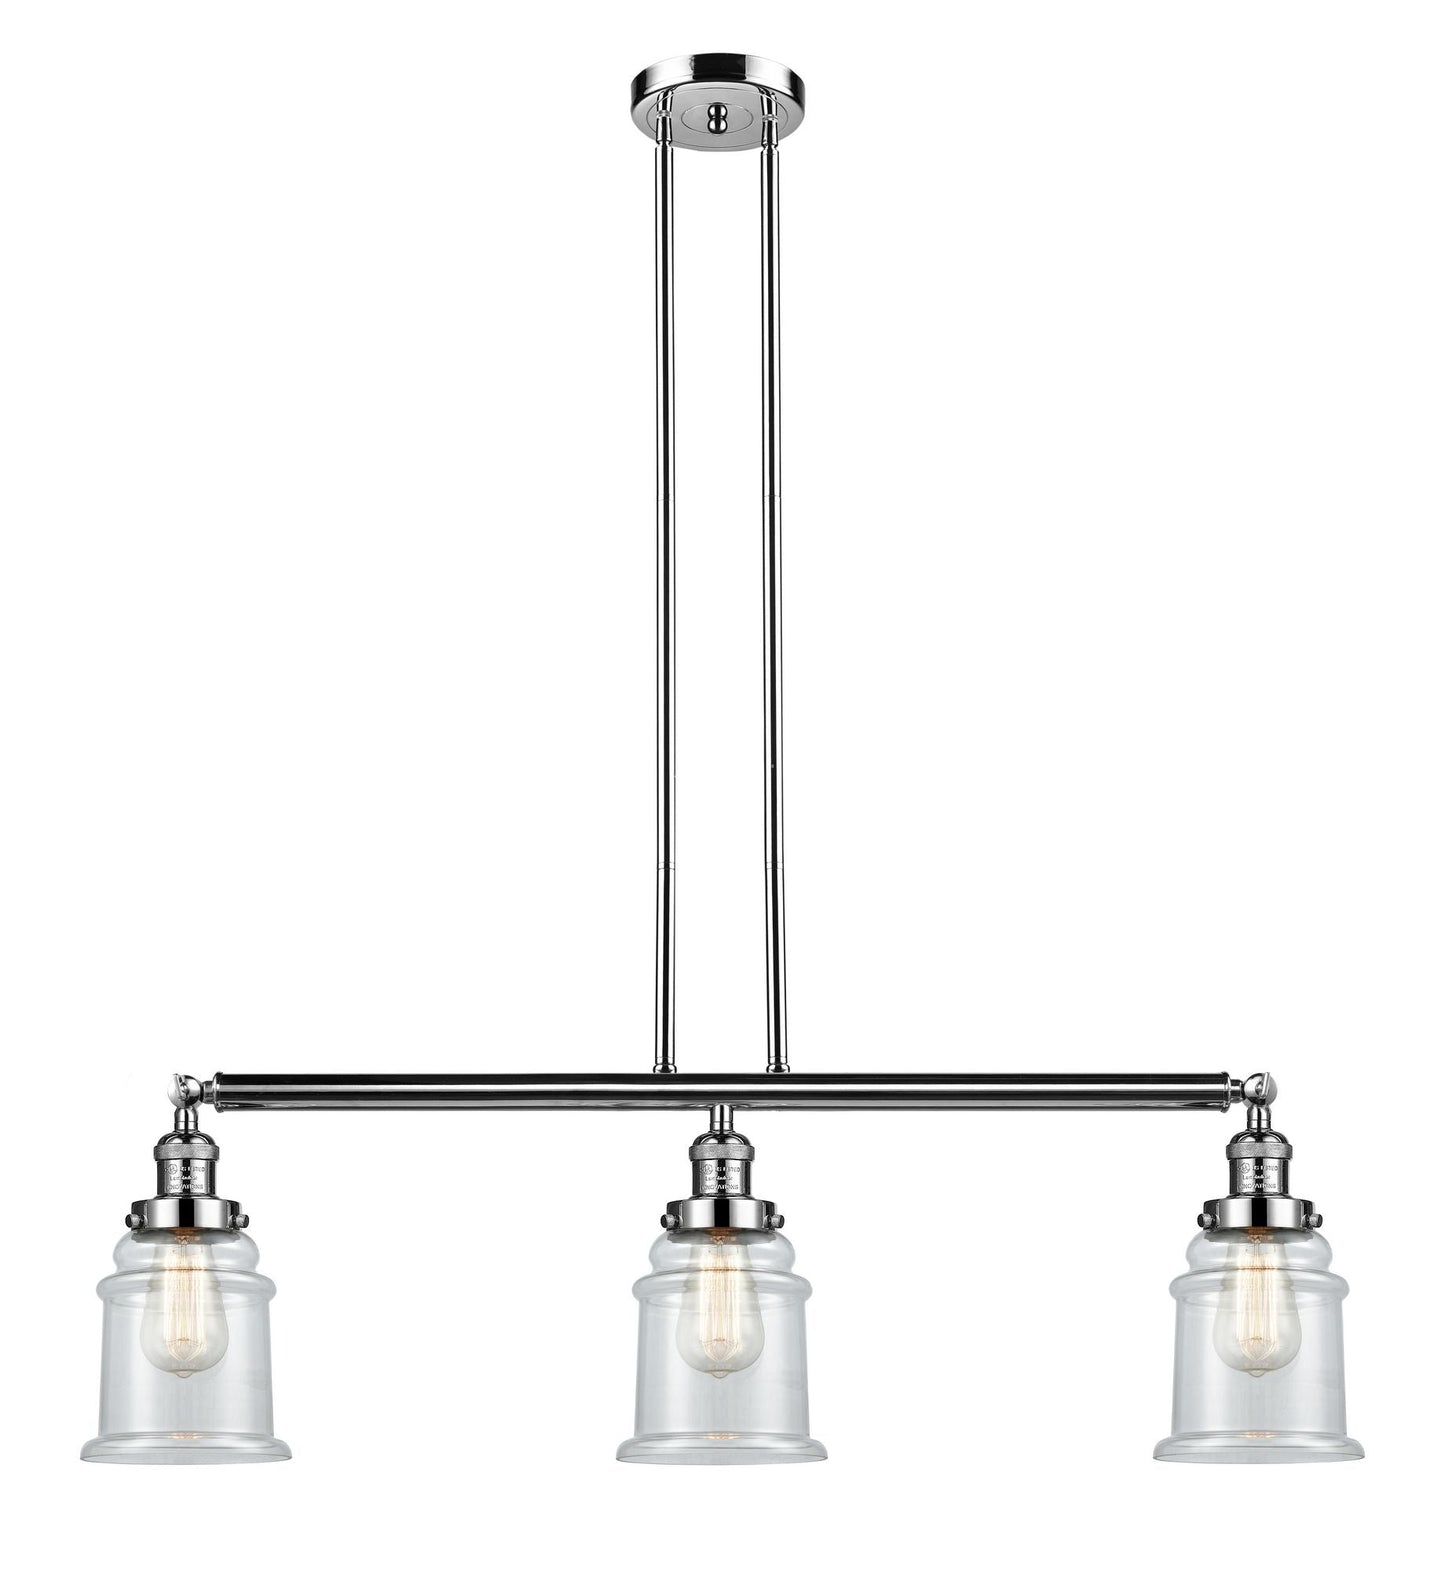 213-PN-G182 3-Light 38.5" Polished Nickel Island Light - Clear Canton Glass - LED Bulb - Dimmensions: 38.5 x 6 x 11<br>Minimum Height : 21.5<br>Maximum Height : 45.5 - Sloped Ceiling Compatible: Yes